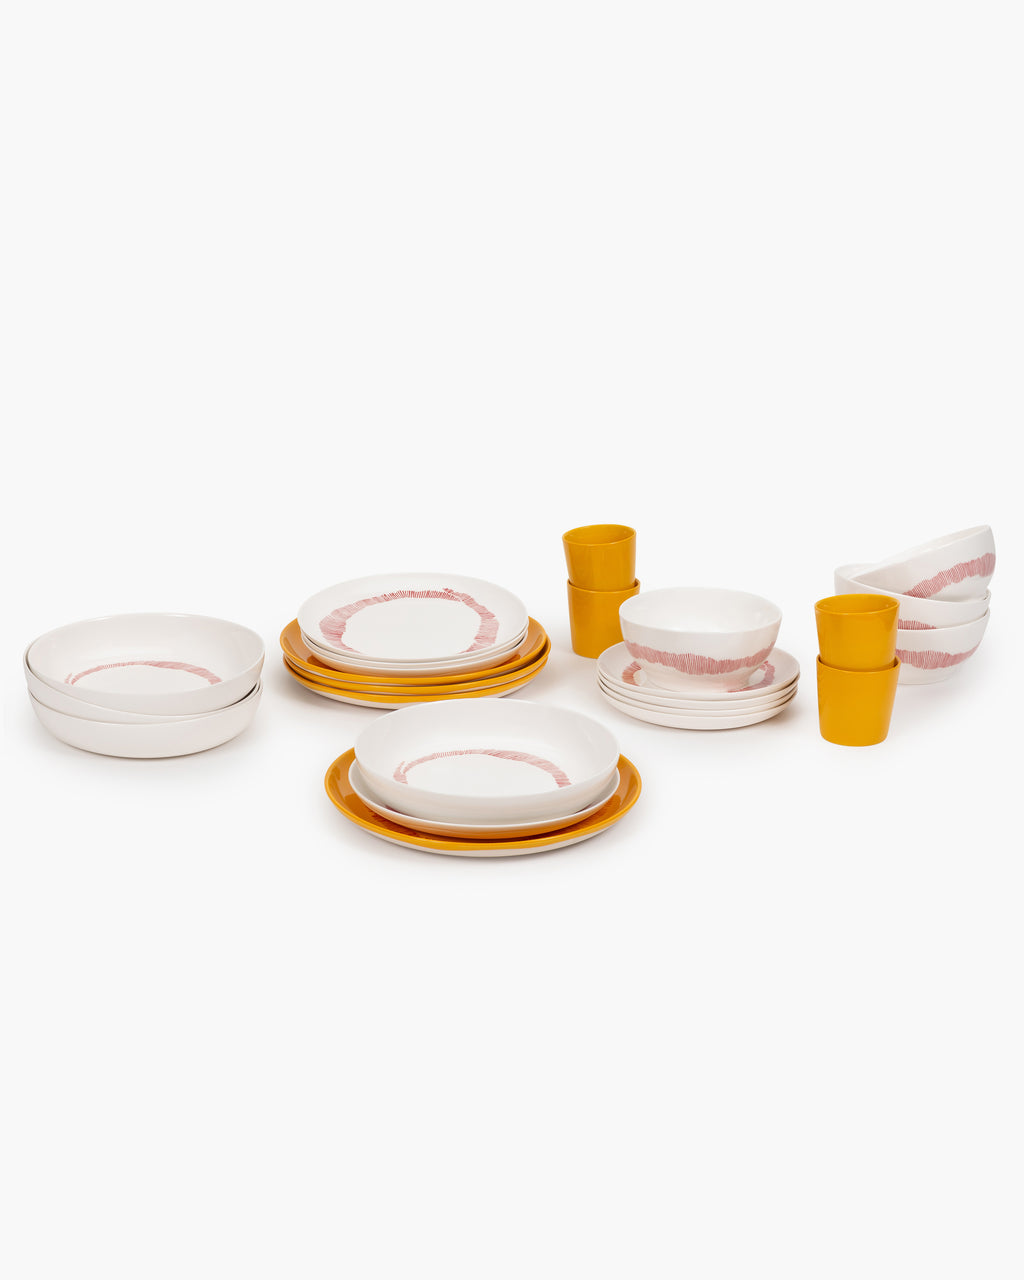 Full Set 24 pieces - Feast tableware by Ottolenghi - White